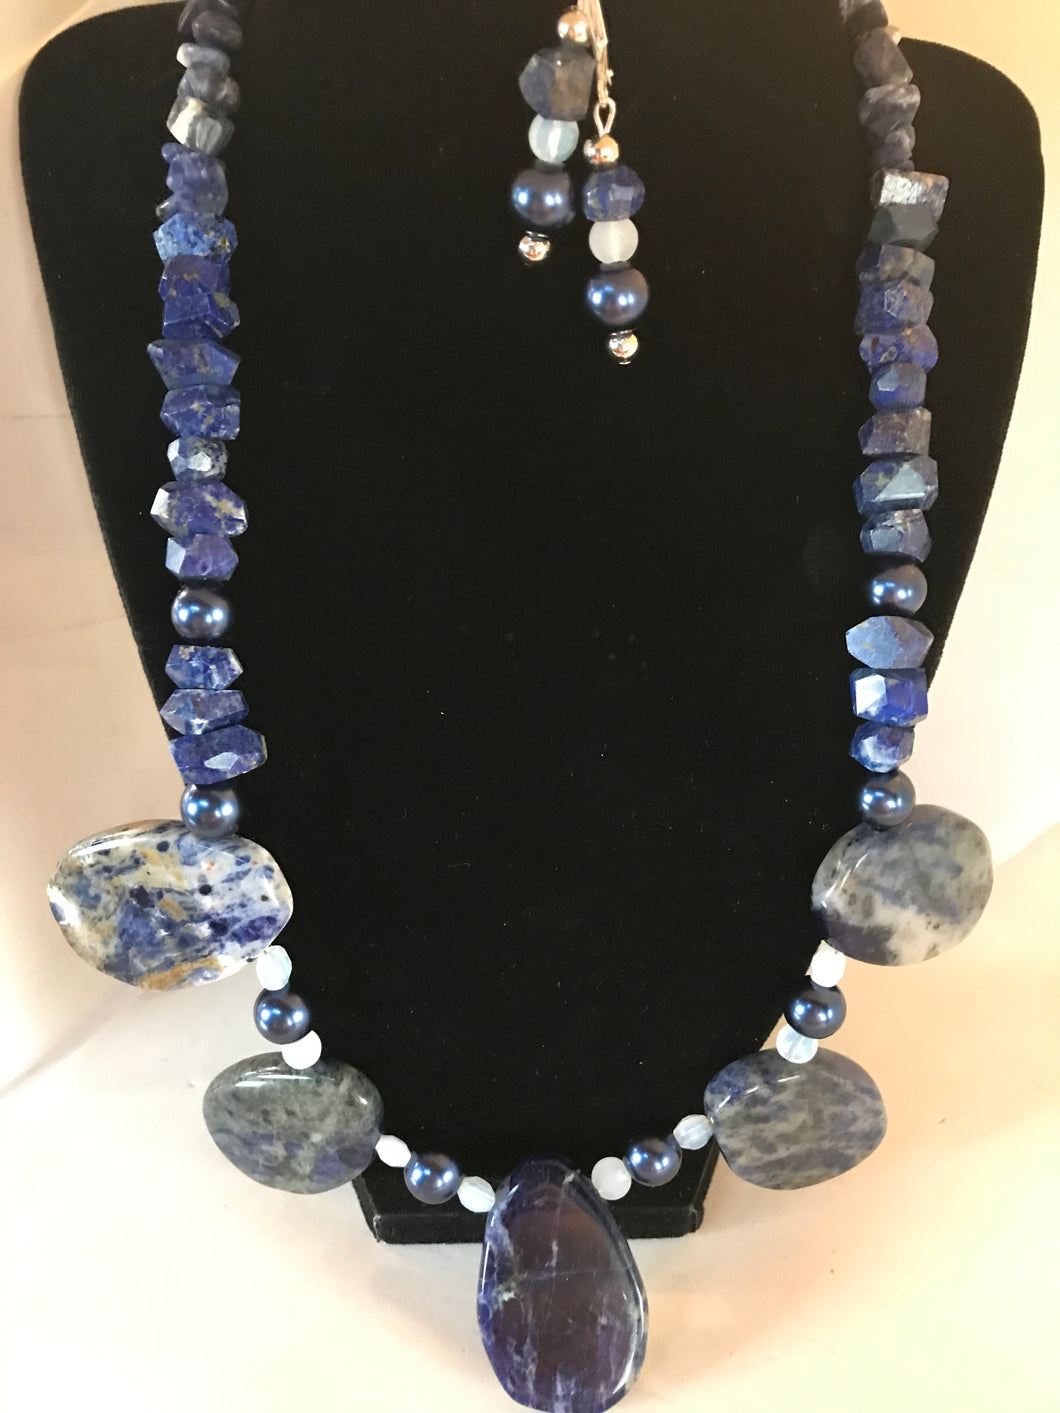 Sodalite semi precious stones with matching earrings.